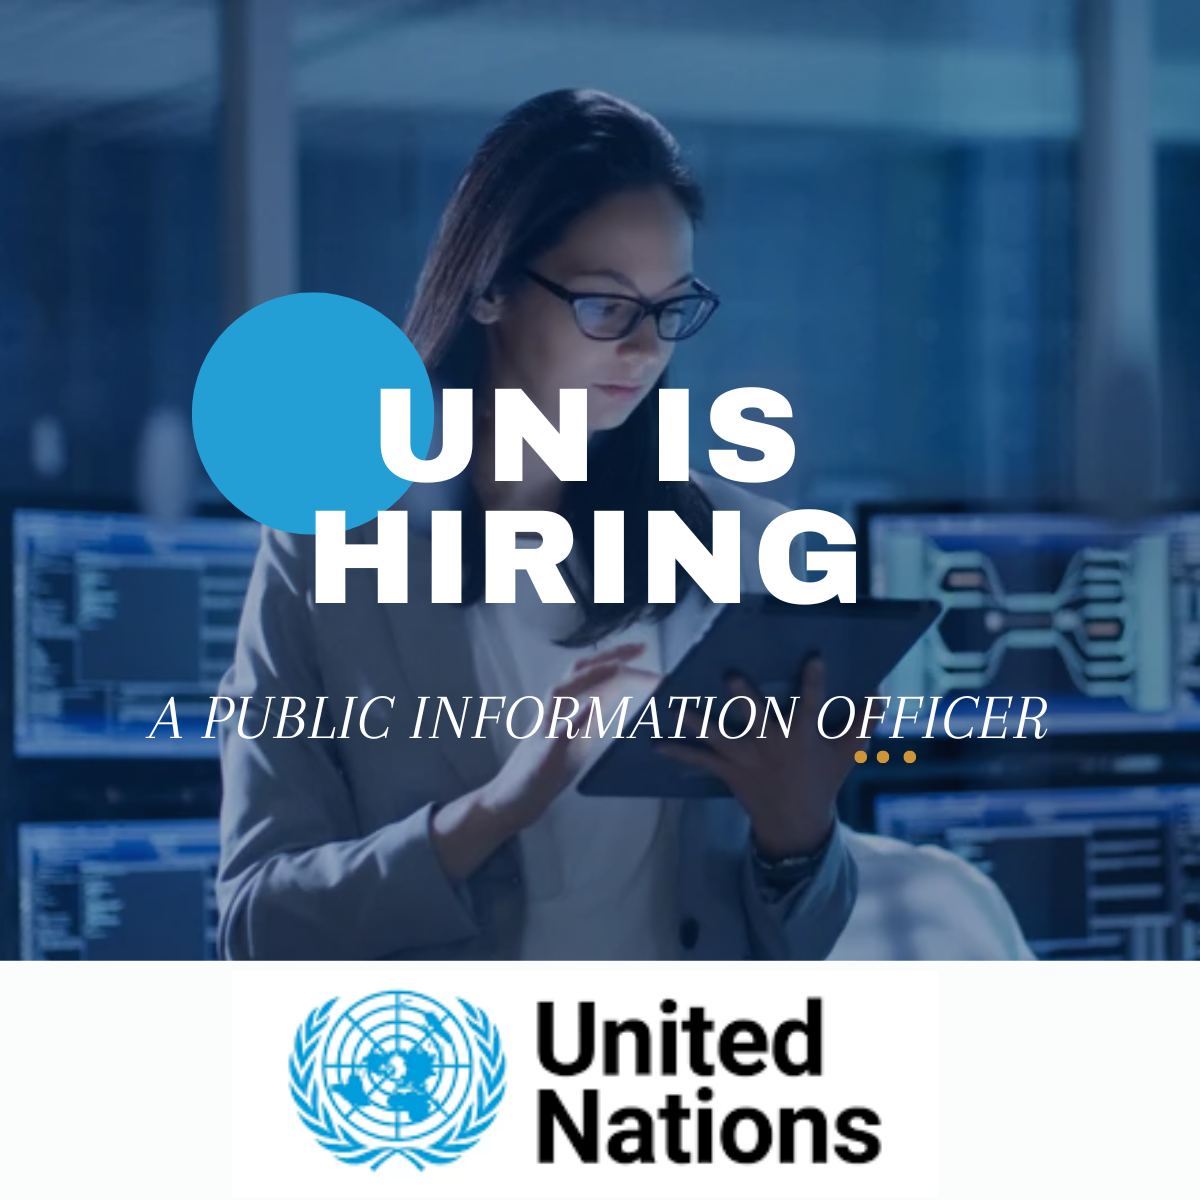 Are you looking for a new job? The United Nations is currently seeking a Public Information Officer. Submit your application today.